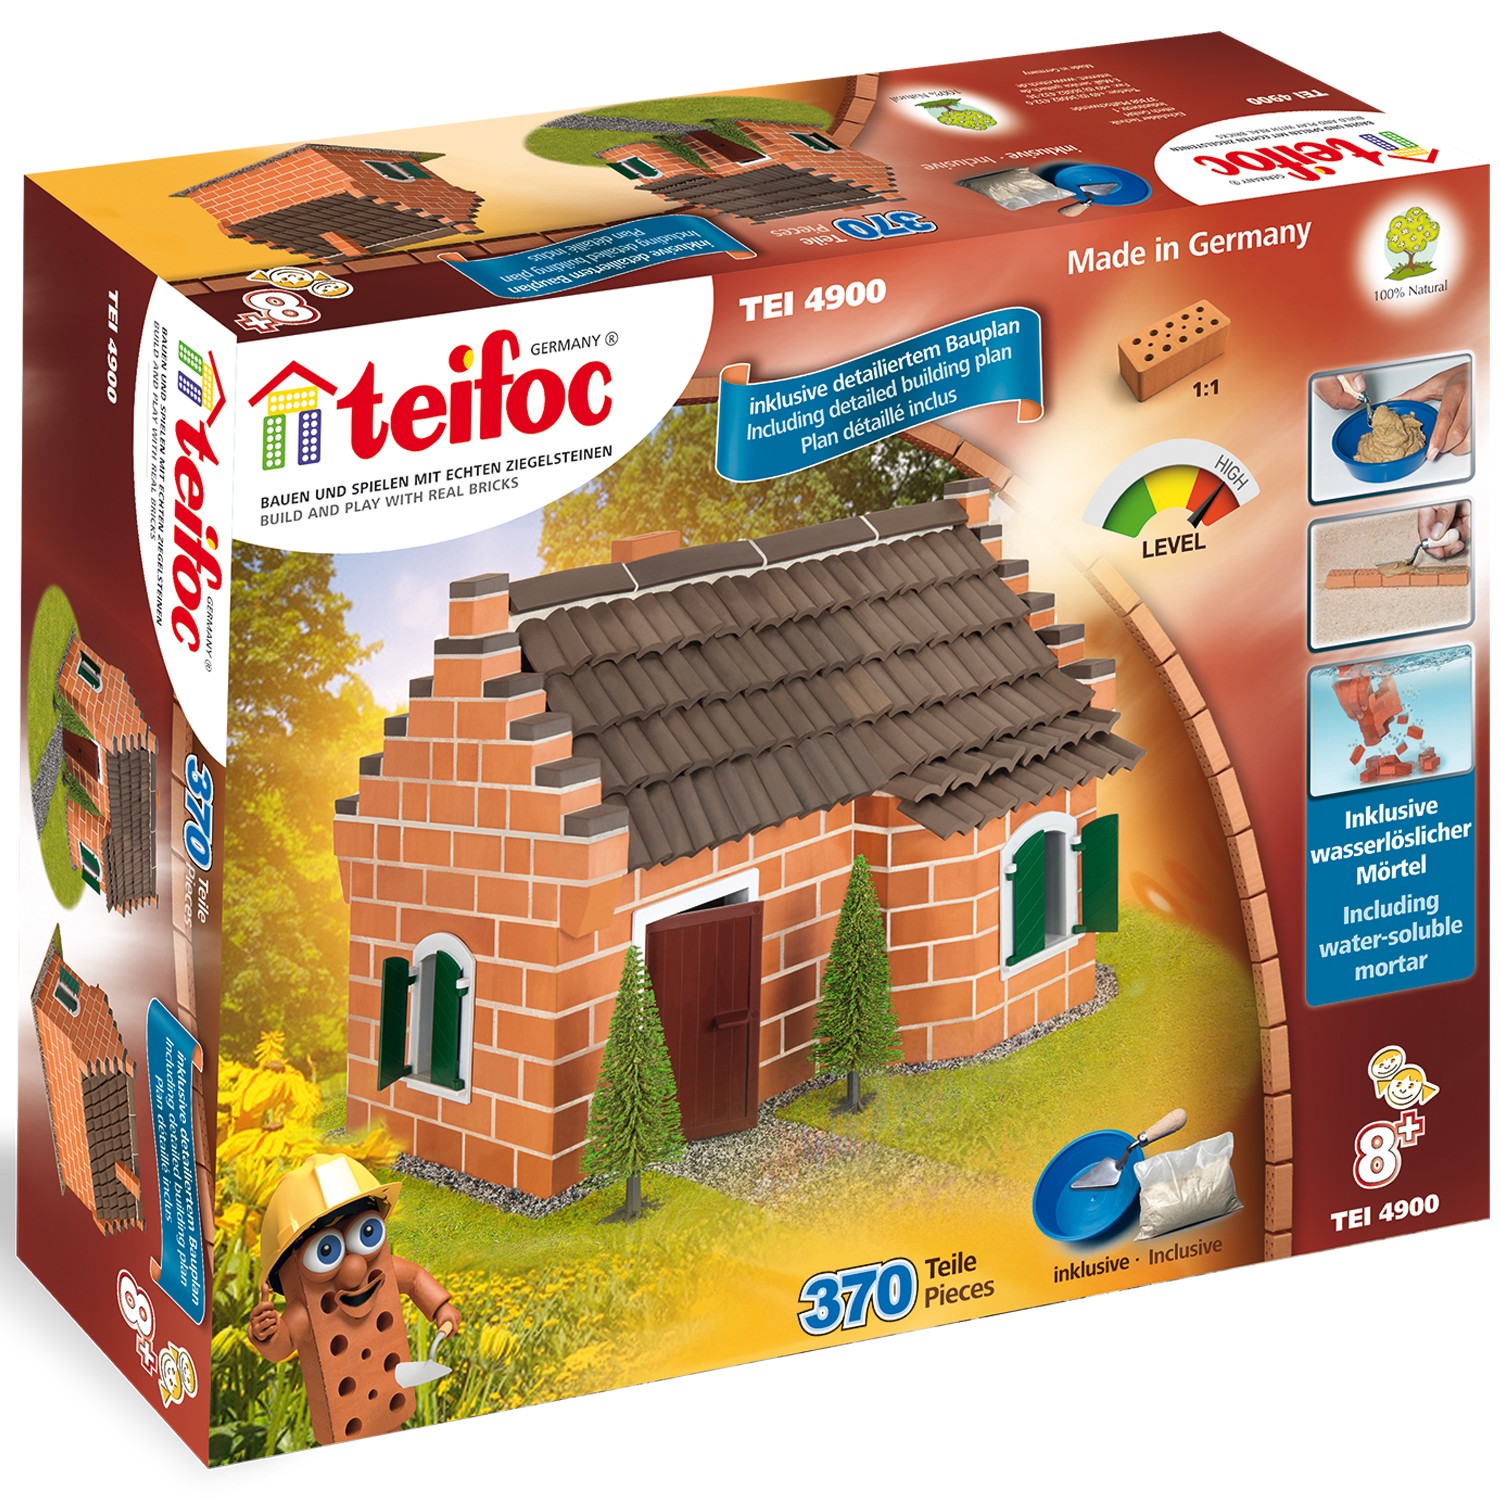 12 Days of Awesomely Geeky Gifts: Teifoc Building Sets